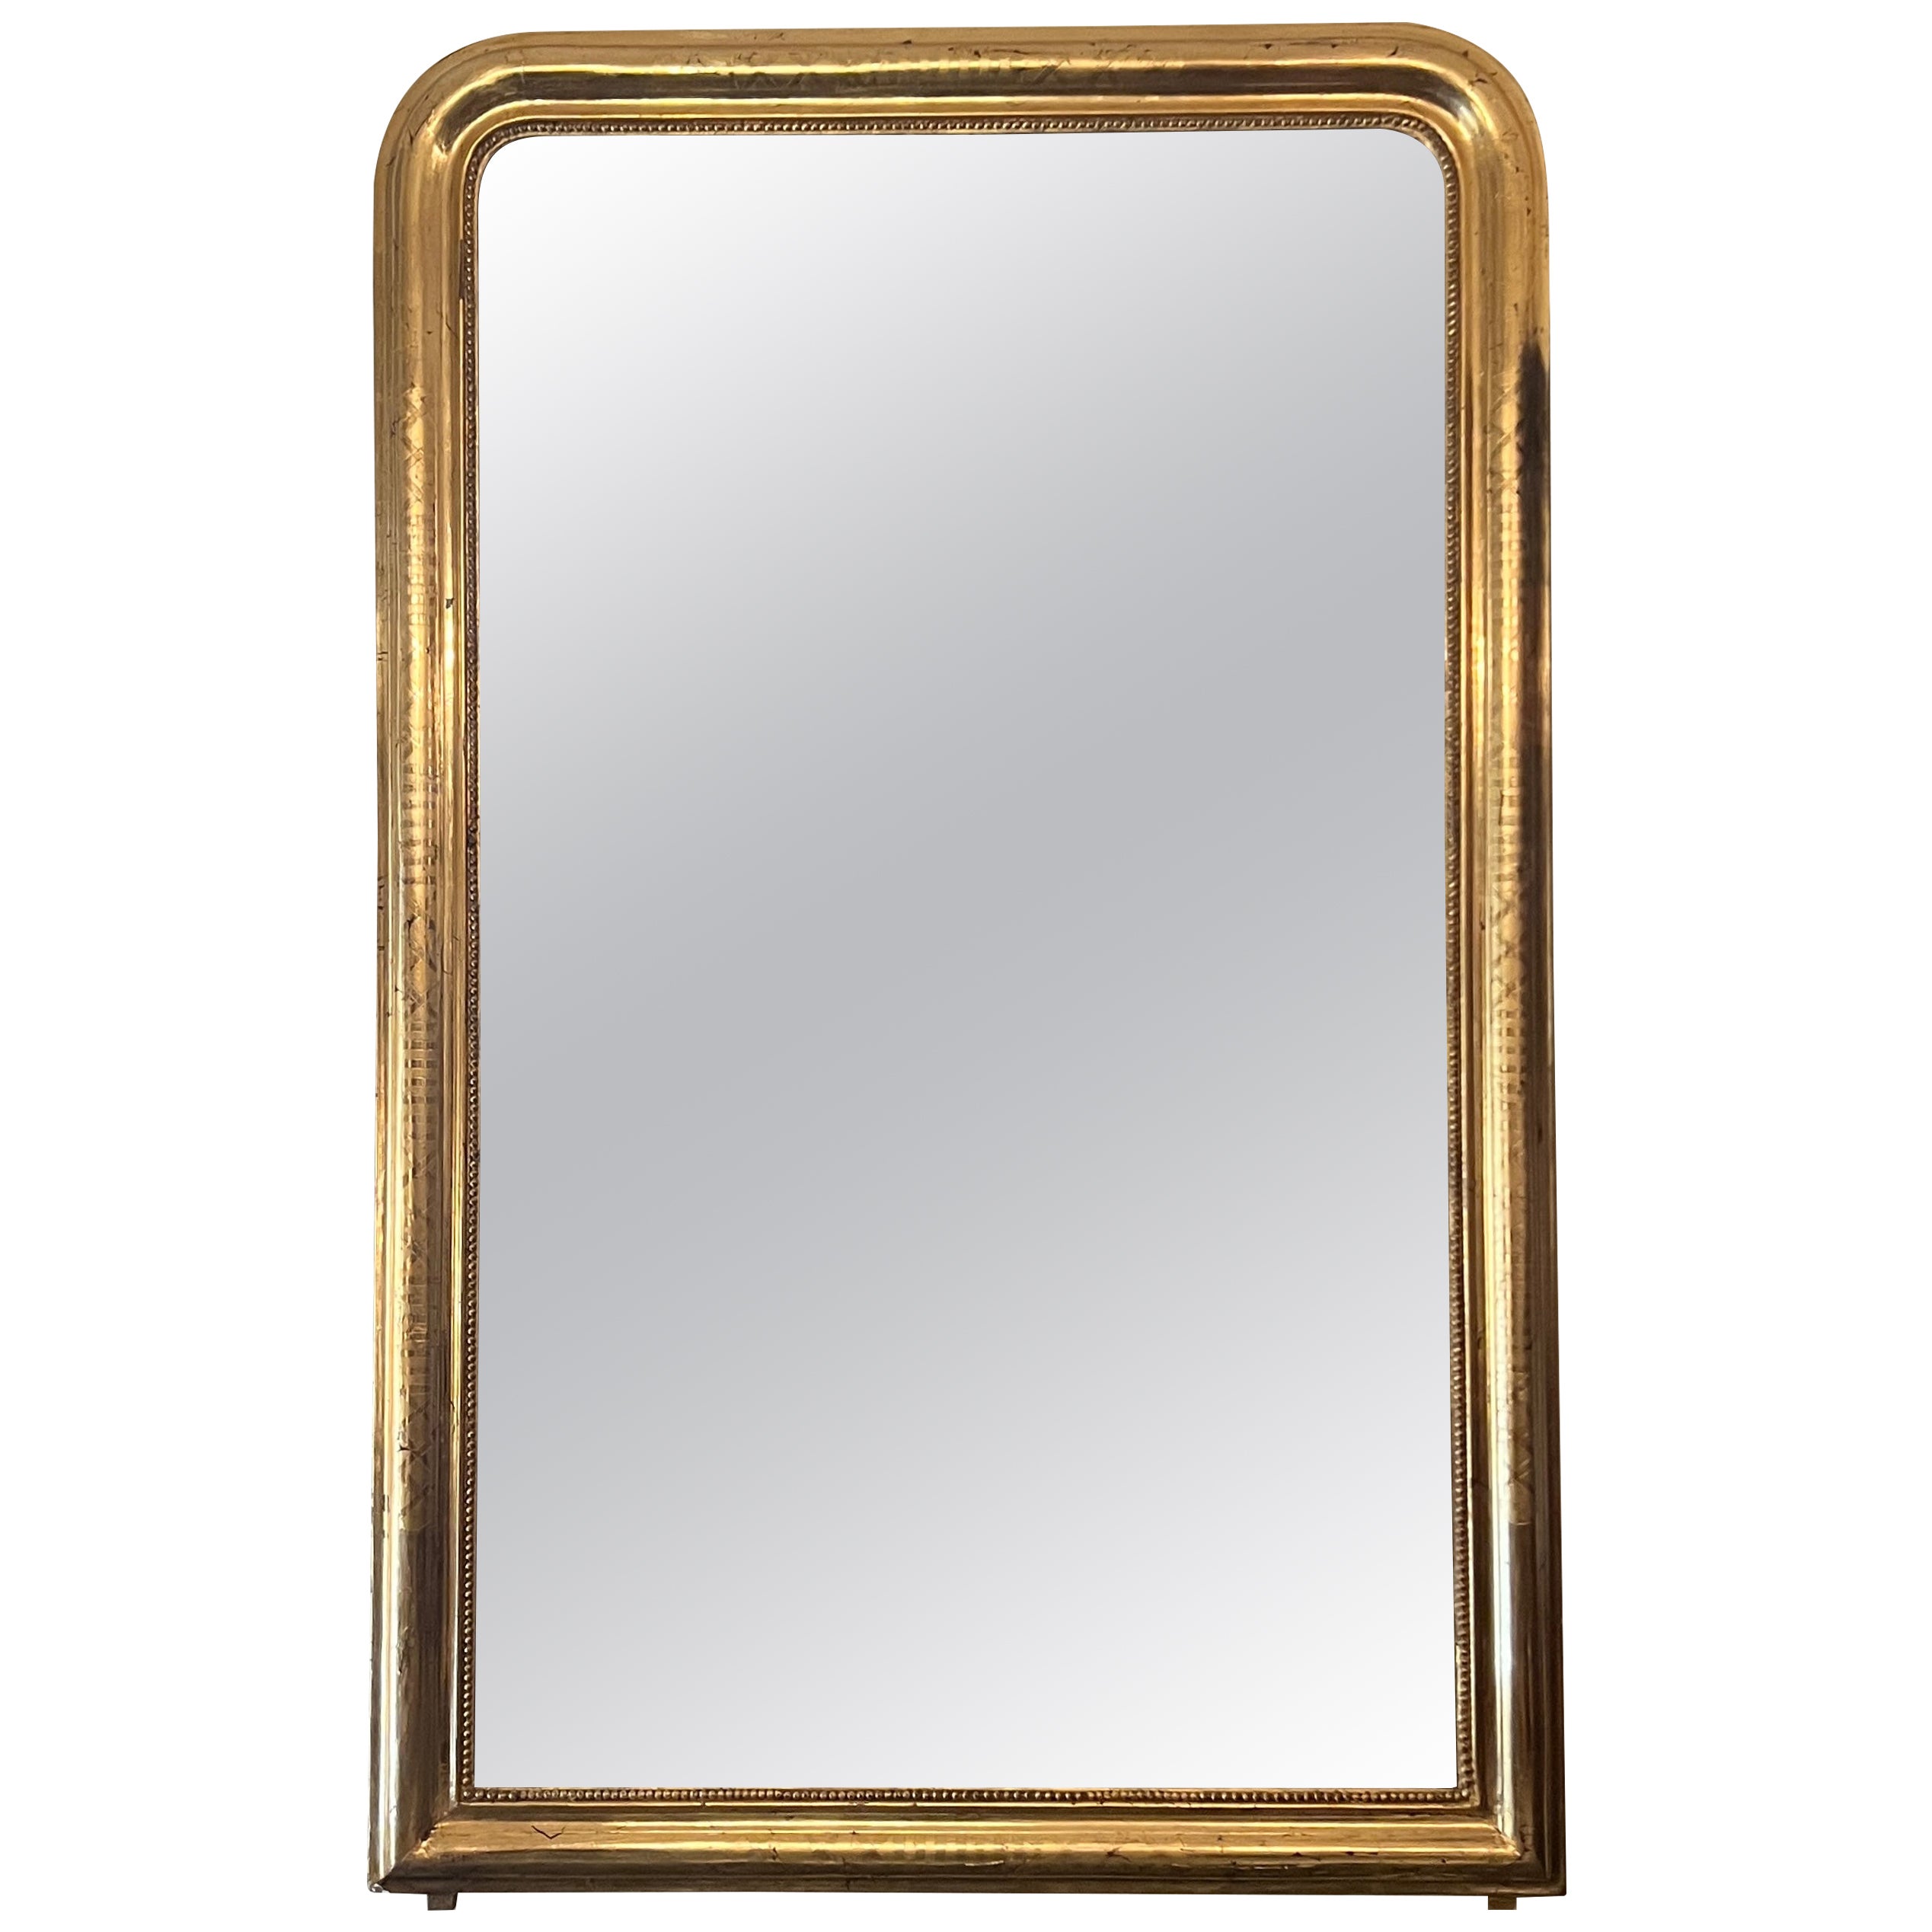 Antique French Louis Philippe Gold Leaf Mirror, Circa 1880.